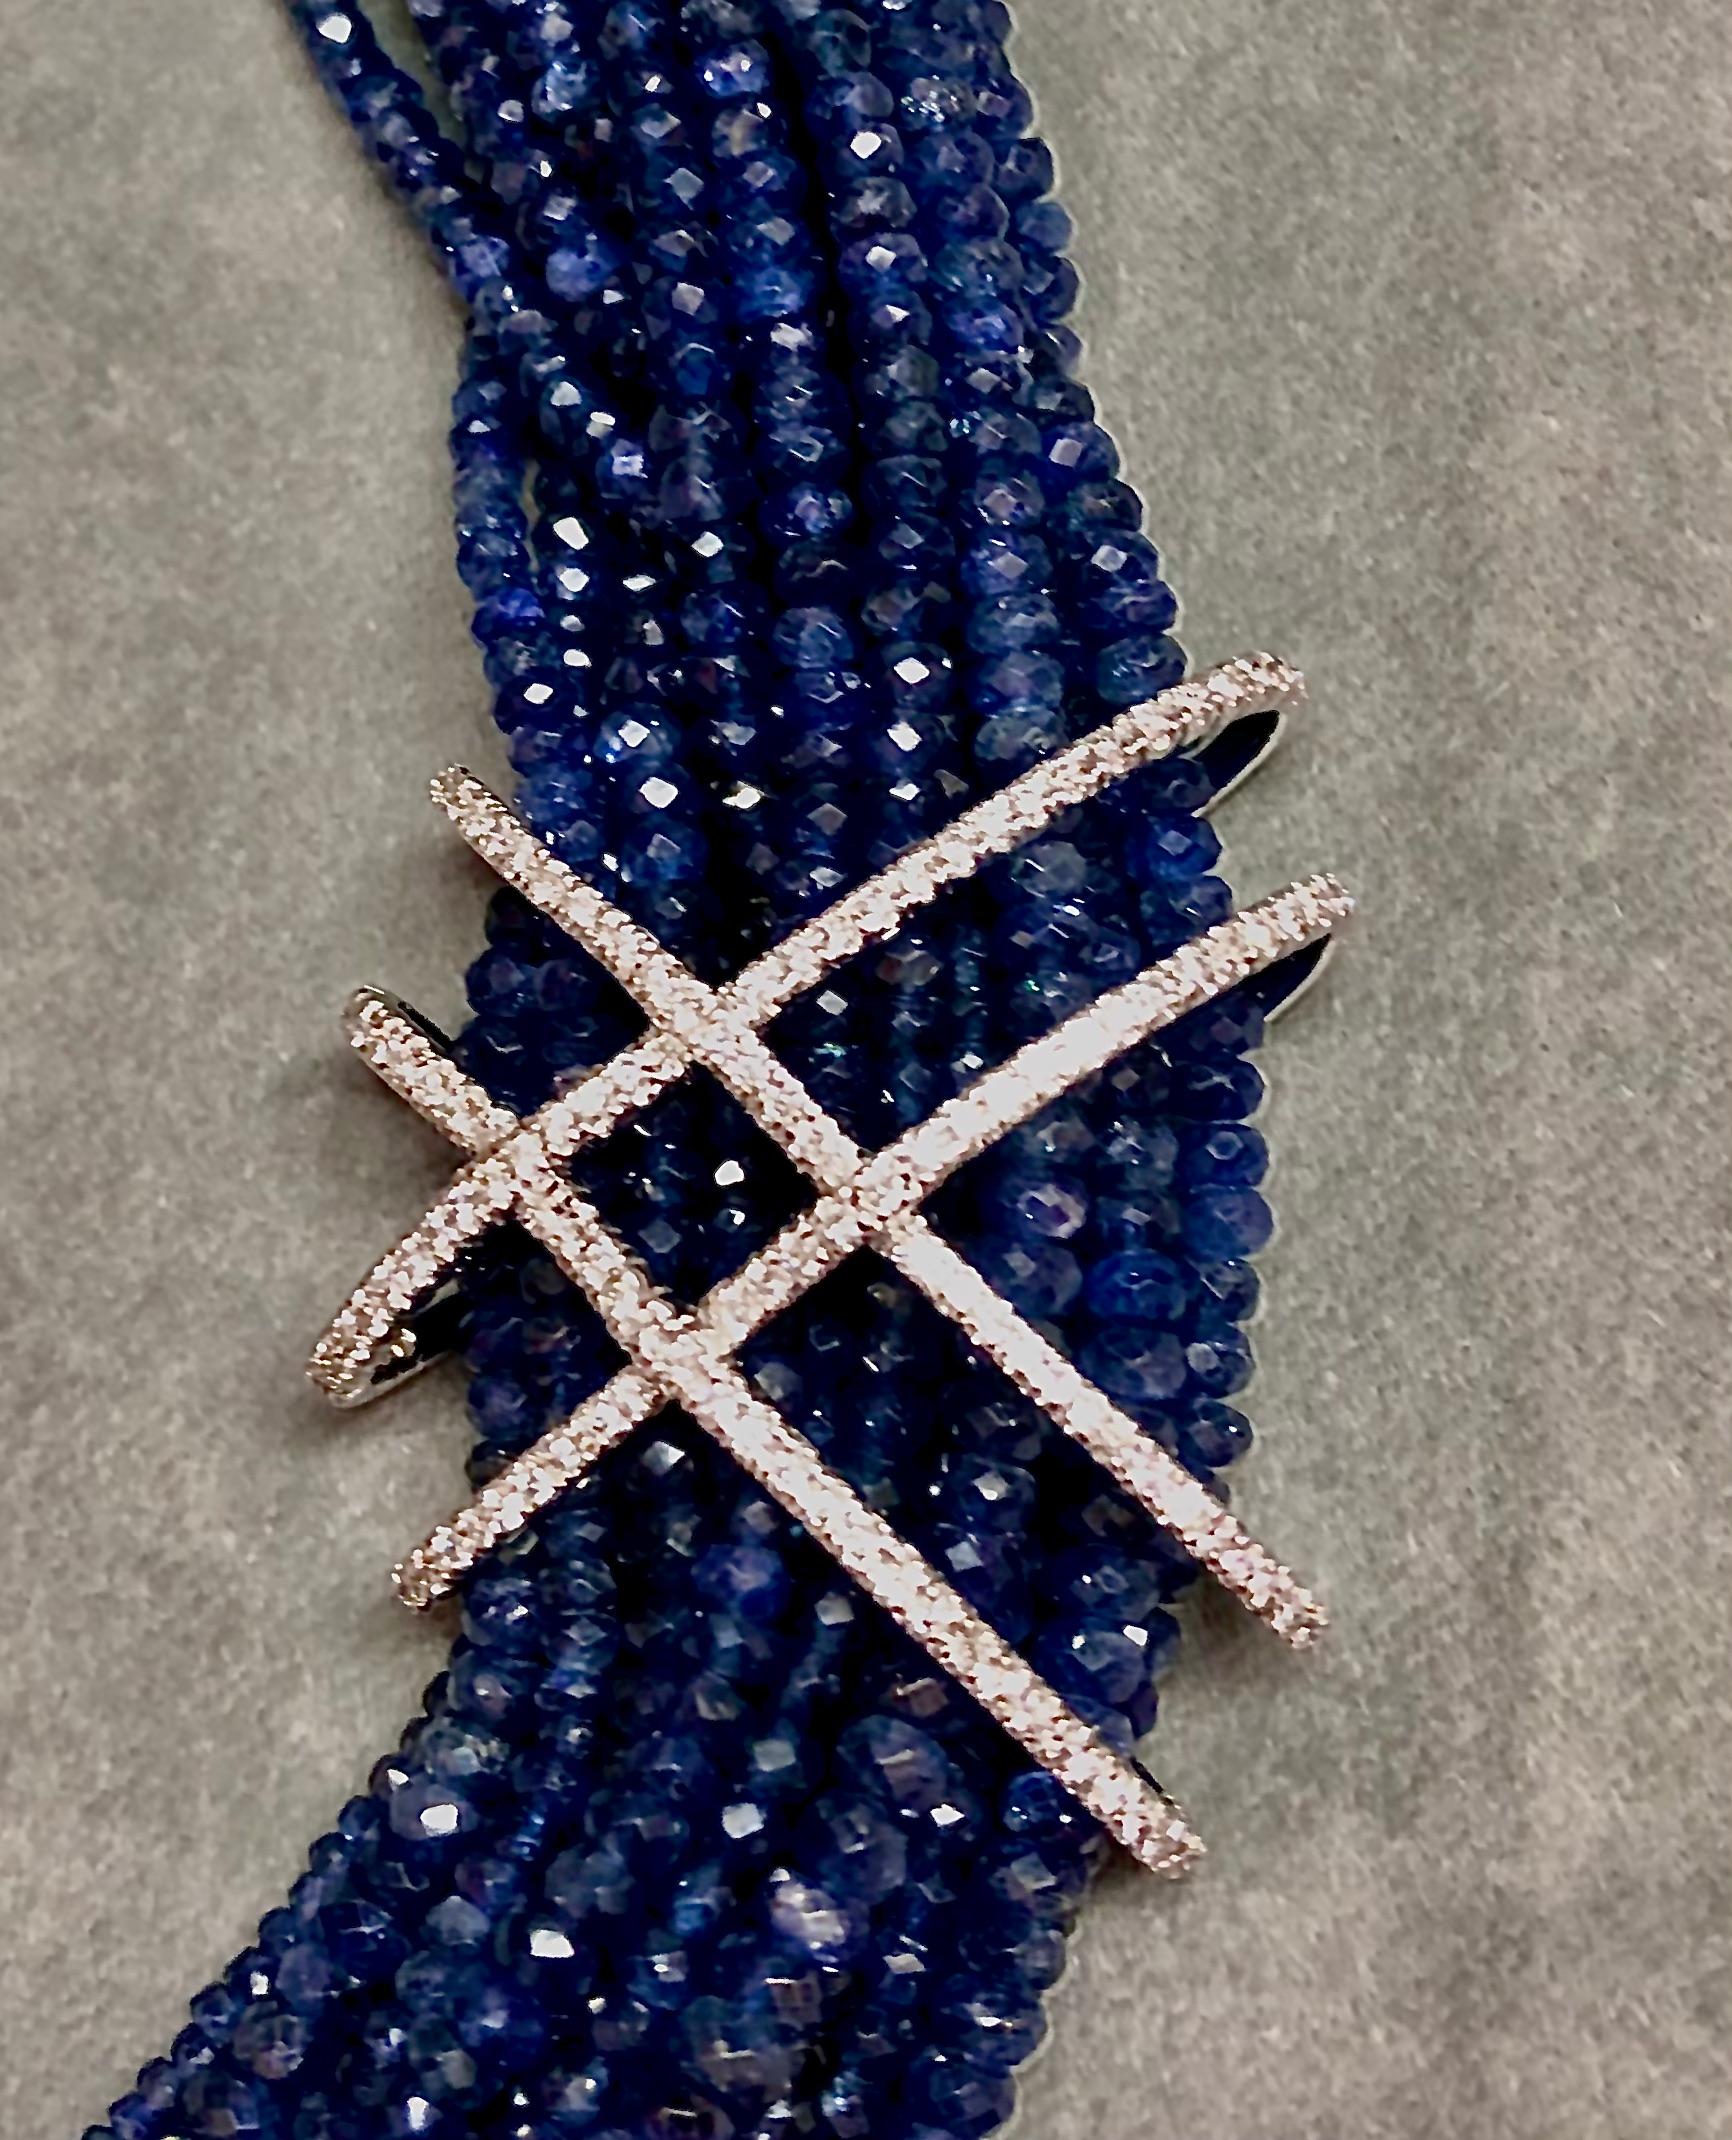 Brilliant Cut Multi strand necklace/choker of deep blue faceted sapphires and diamonds.